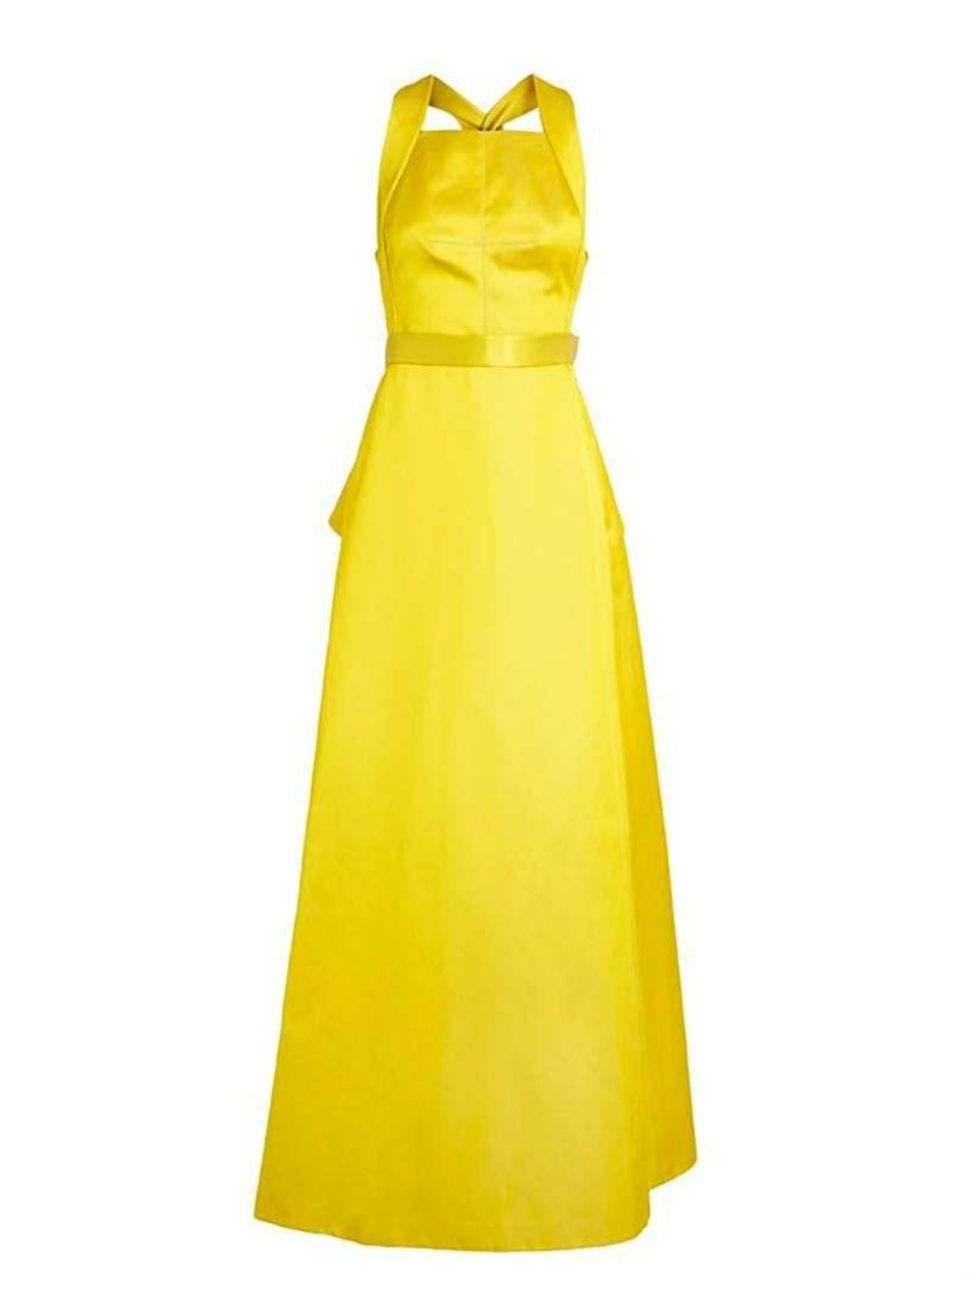 <p>Bright colour was a big trend this season.</p><p>This Jason Wu <em>Duchesse Satin Halter-neck gown</em> is £5,430 available at <a href="http://www.brownsfashion.com/product/015N09750004/007/duchesse-satin-halterneck-gown">Browns</a>. </p>